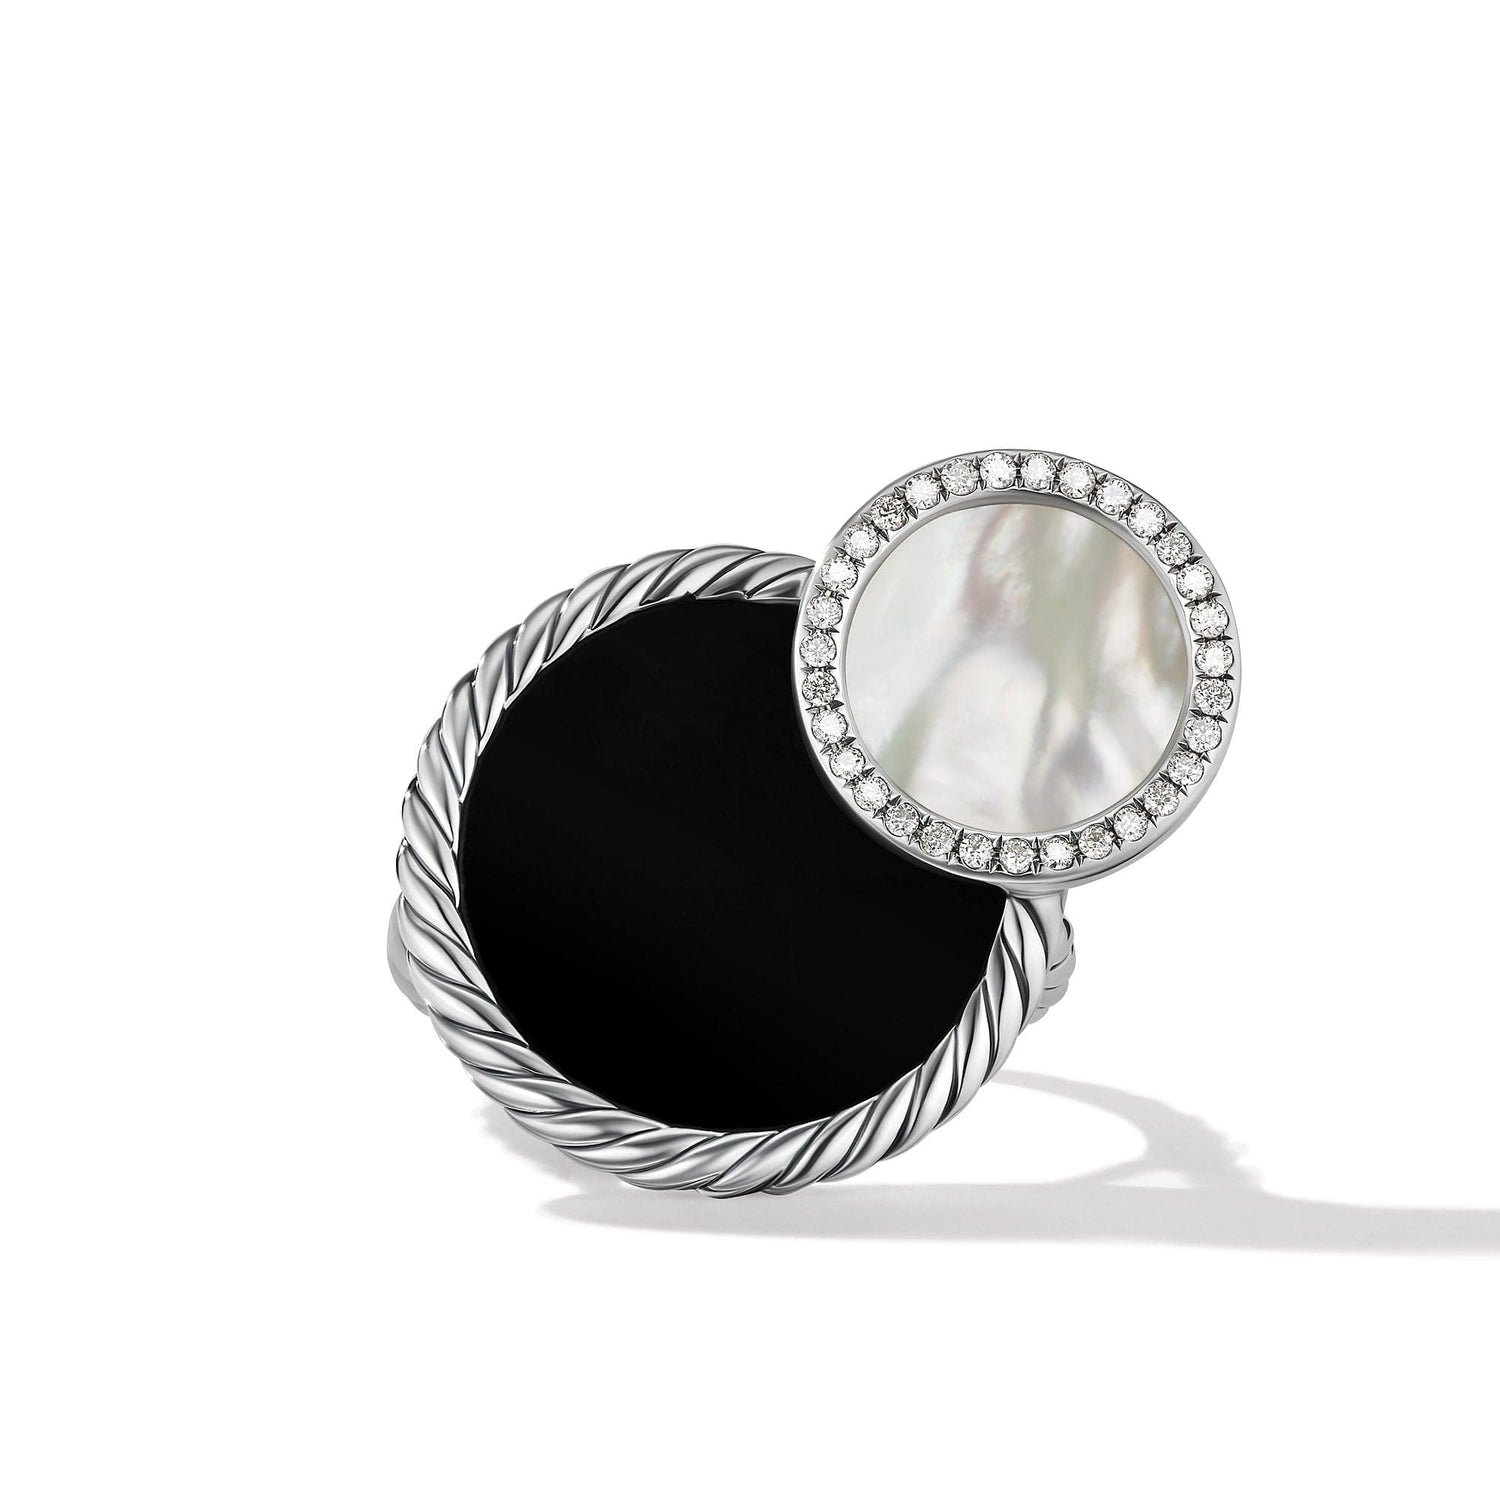 DY Elements Eclipse Ring with Black Onyx, Mother of Pearl and Pave Diamonds - David Yurman- Diamond Cellar